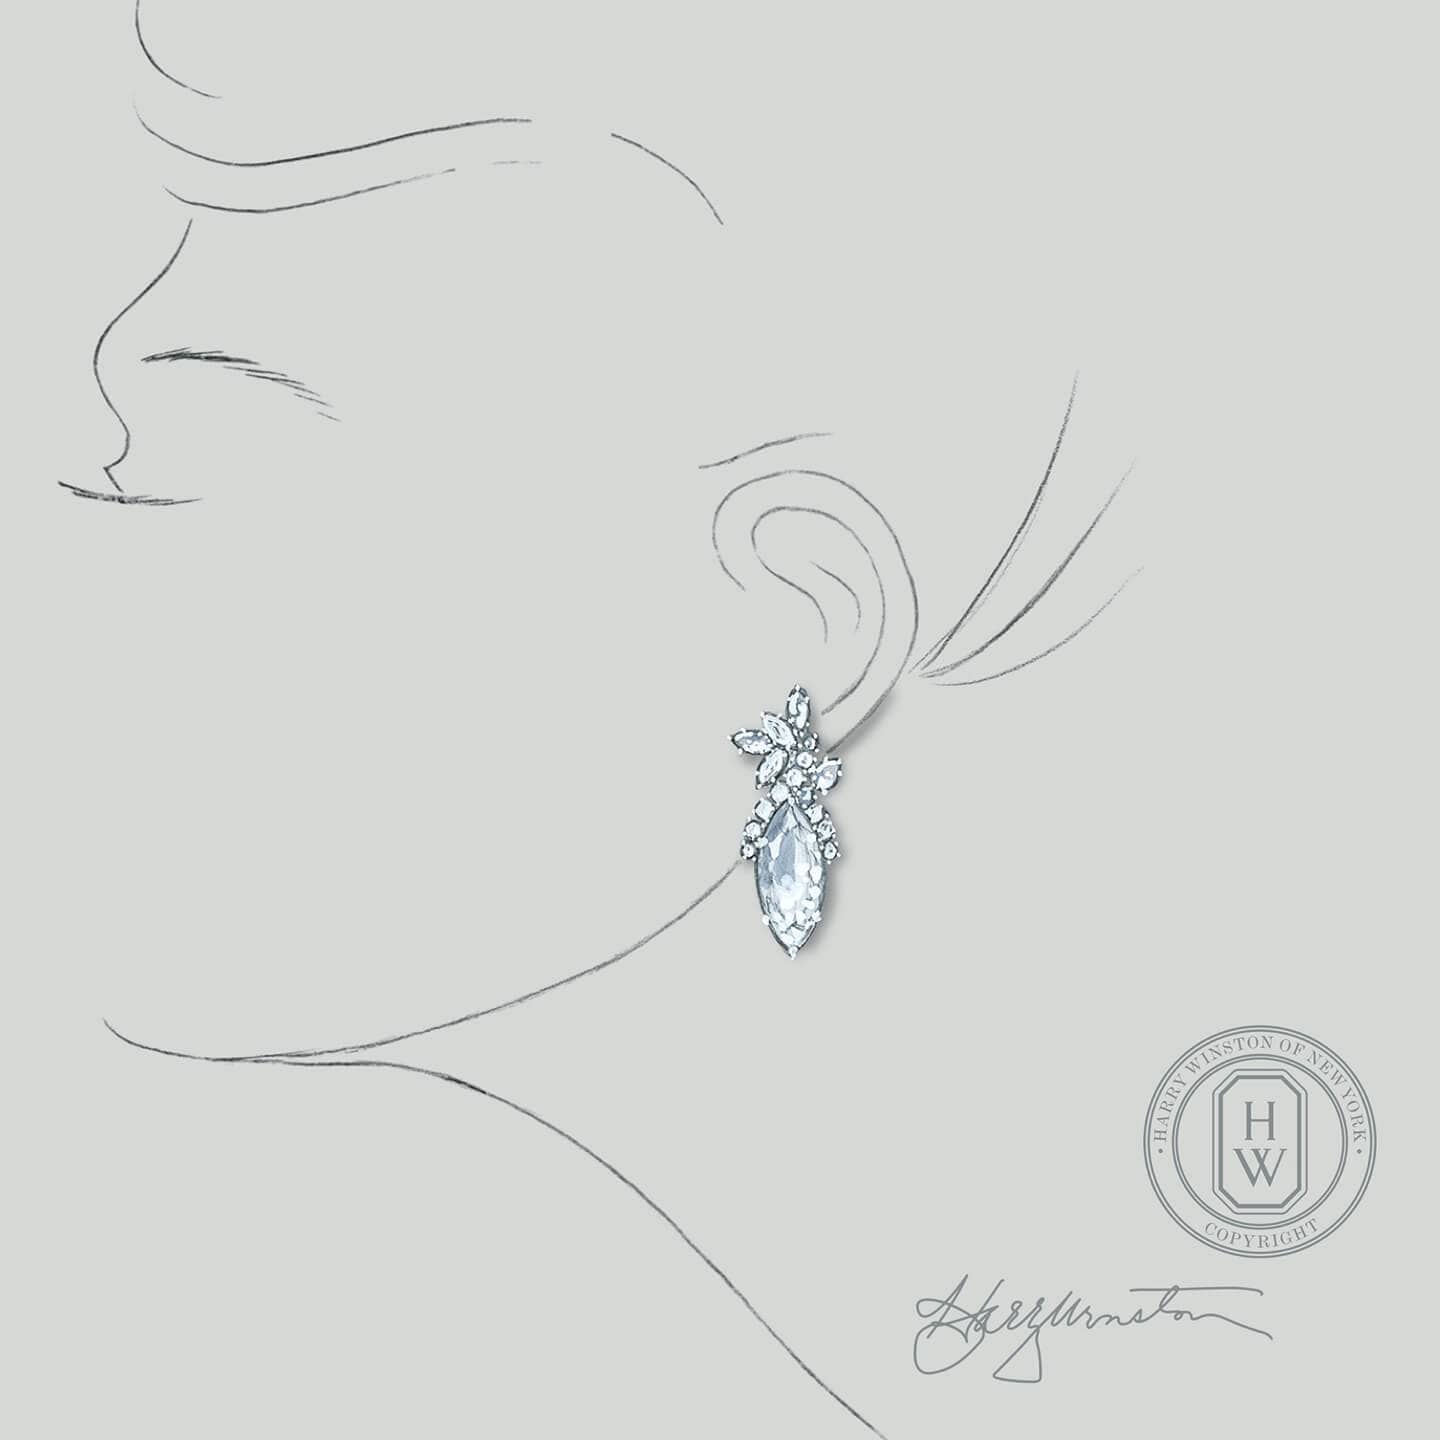 Sketch of an exquisite diamond earring from the Legacy Collection by Harry Winston